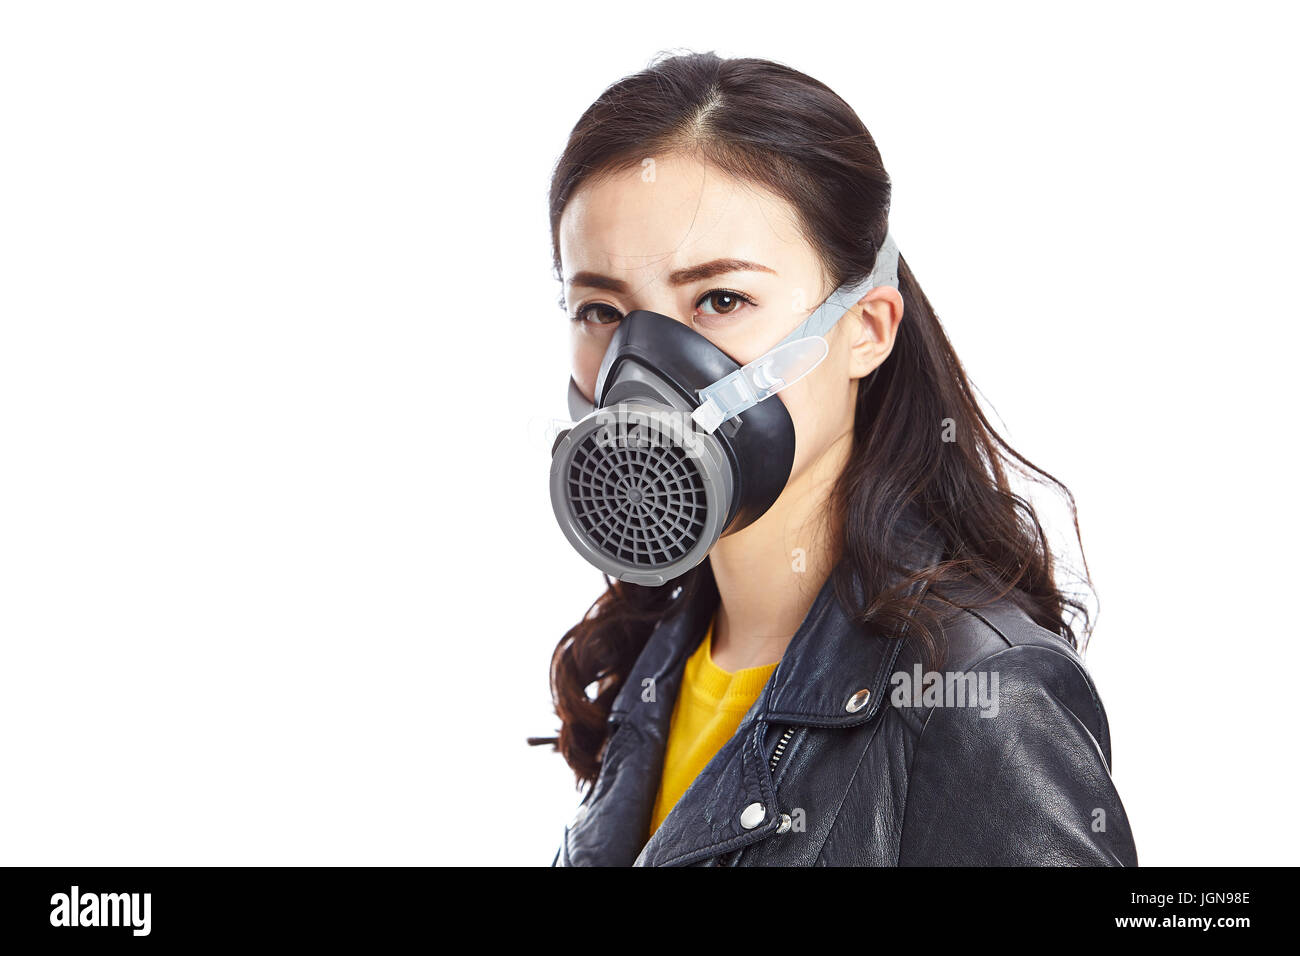 young asian woman in black leather wearing gas mask staring at camera, isolated on white background. Stock Photo